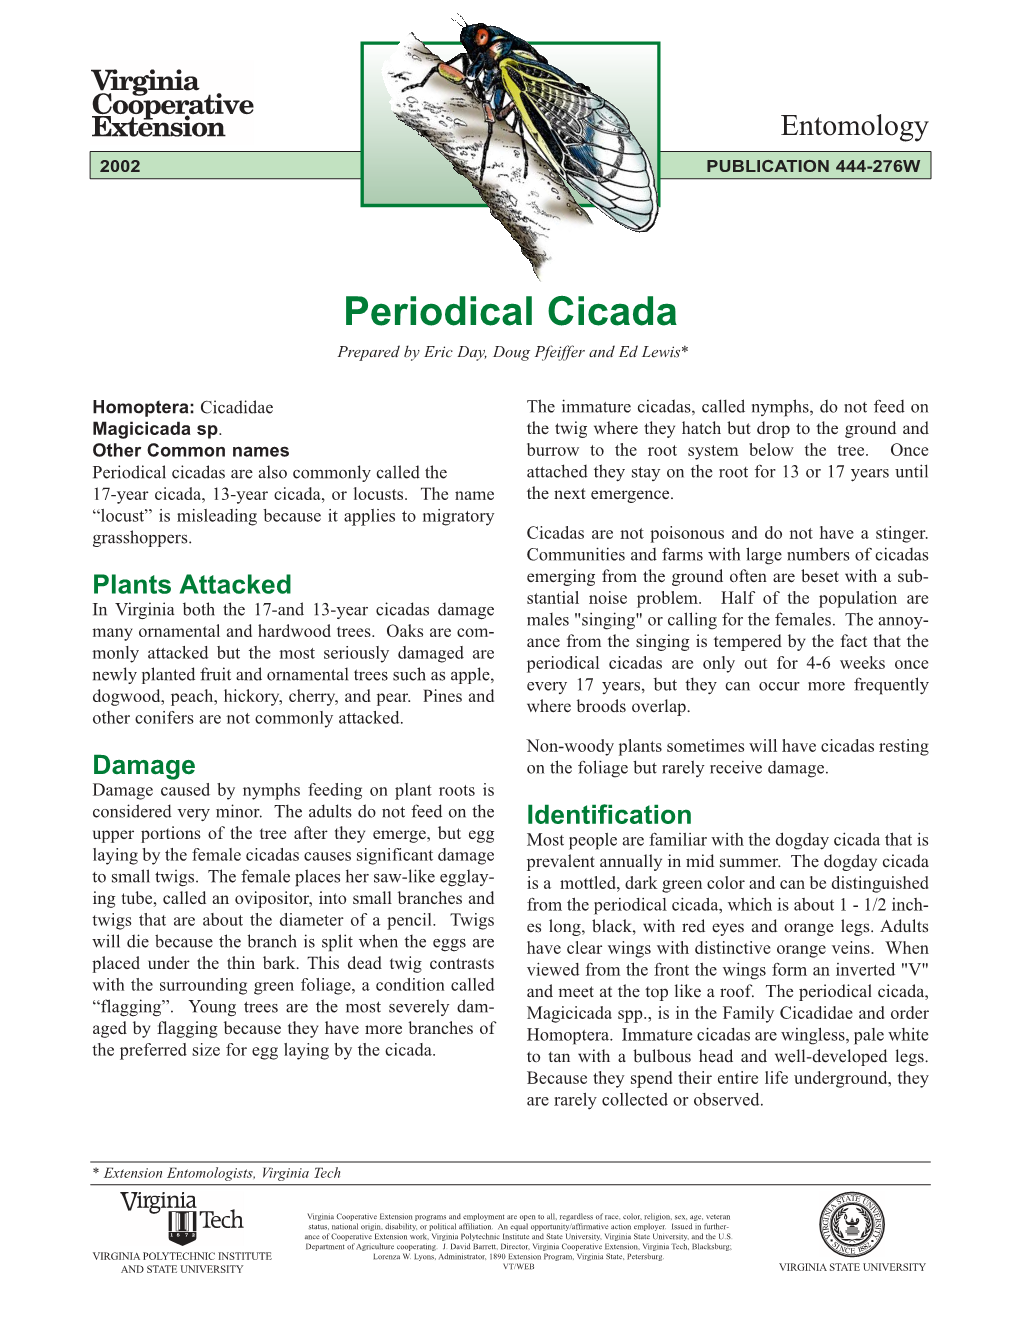 Periodical Cicada Prepared by Eric Day, Doug Pfeiffer and Ed Lewis*